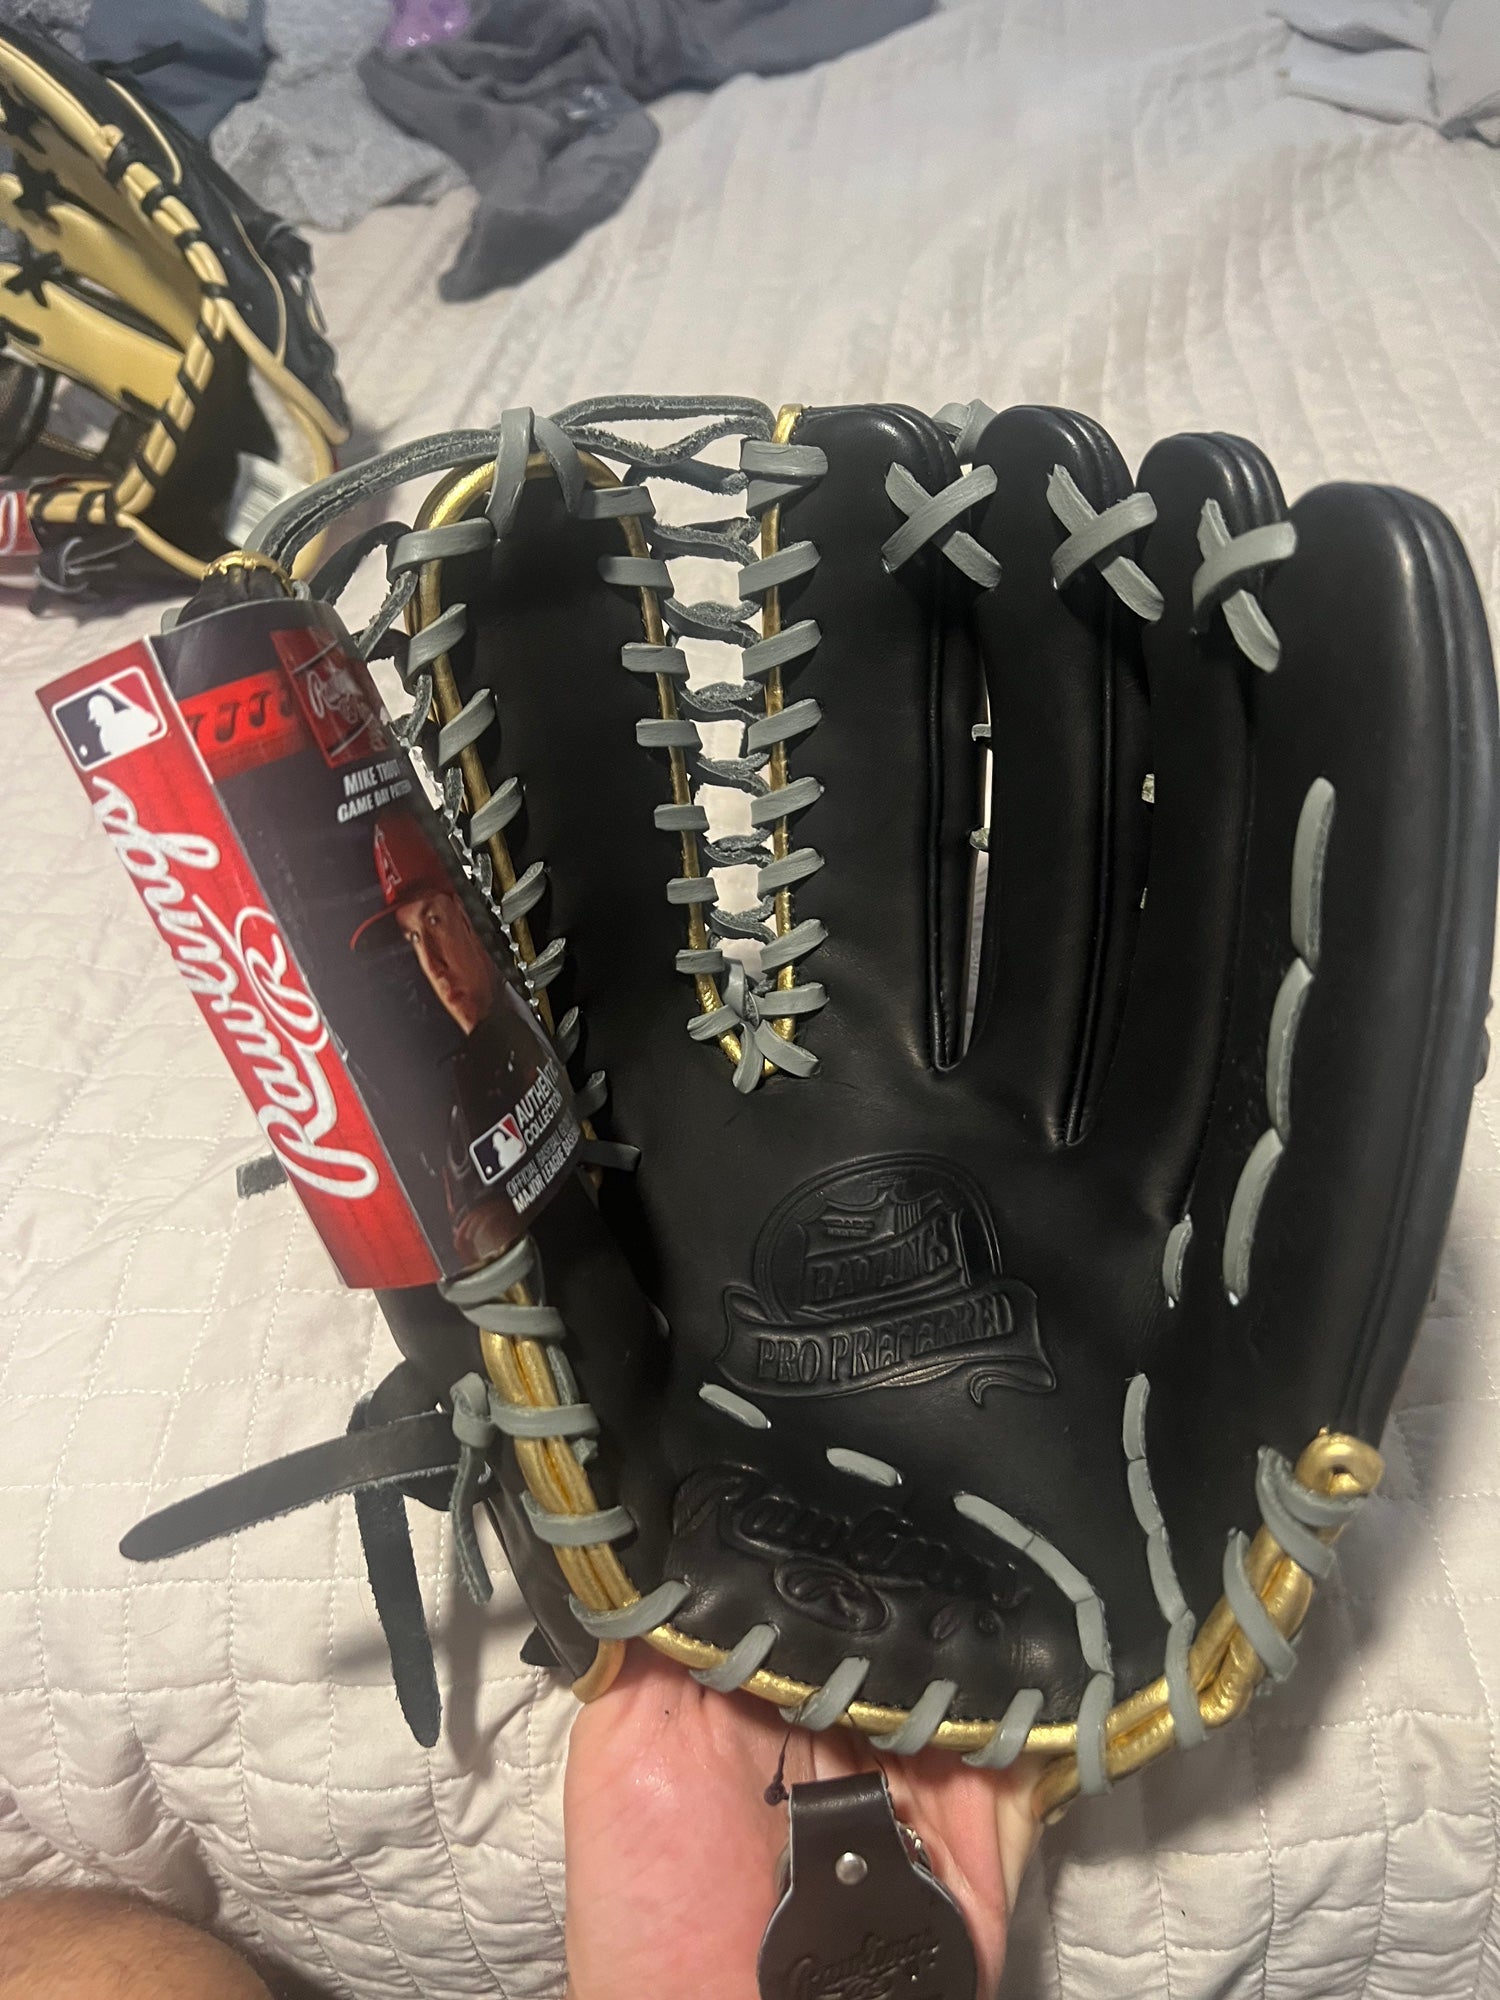 What Pros Wear: Ronald Acuña Jr. Switches to Rawlings Glove after